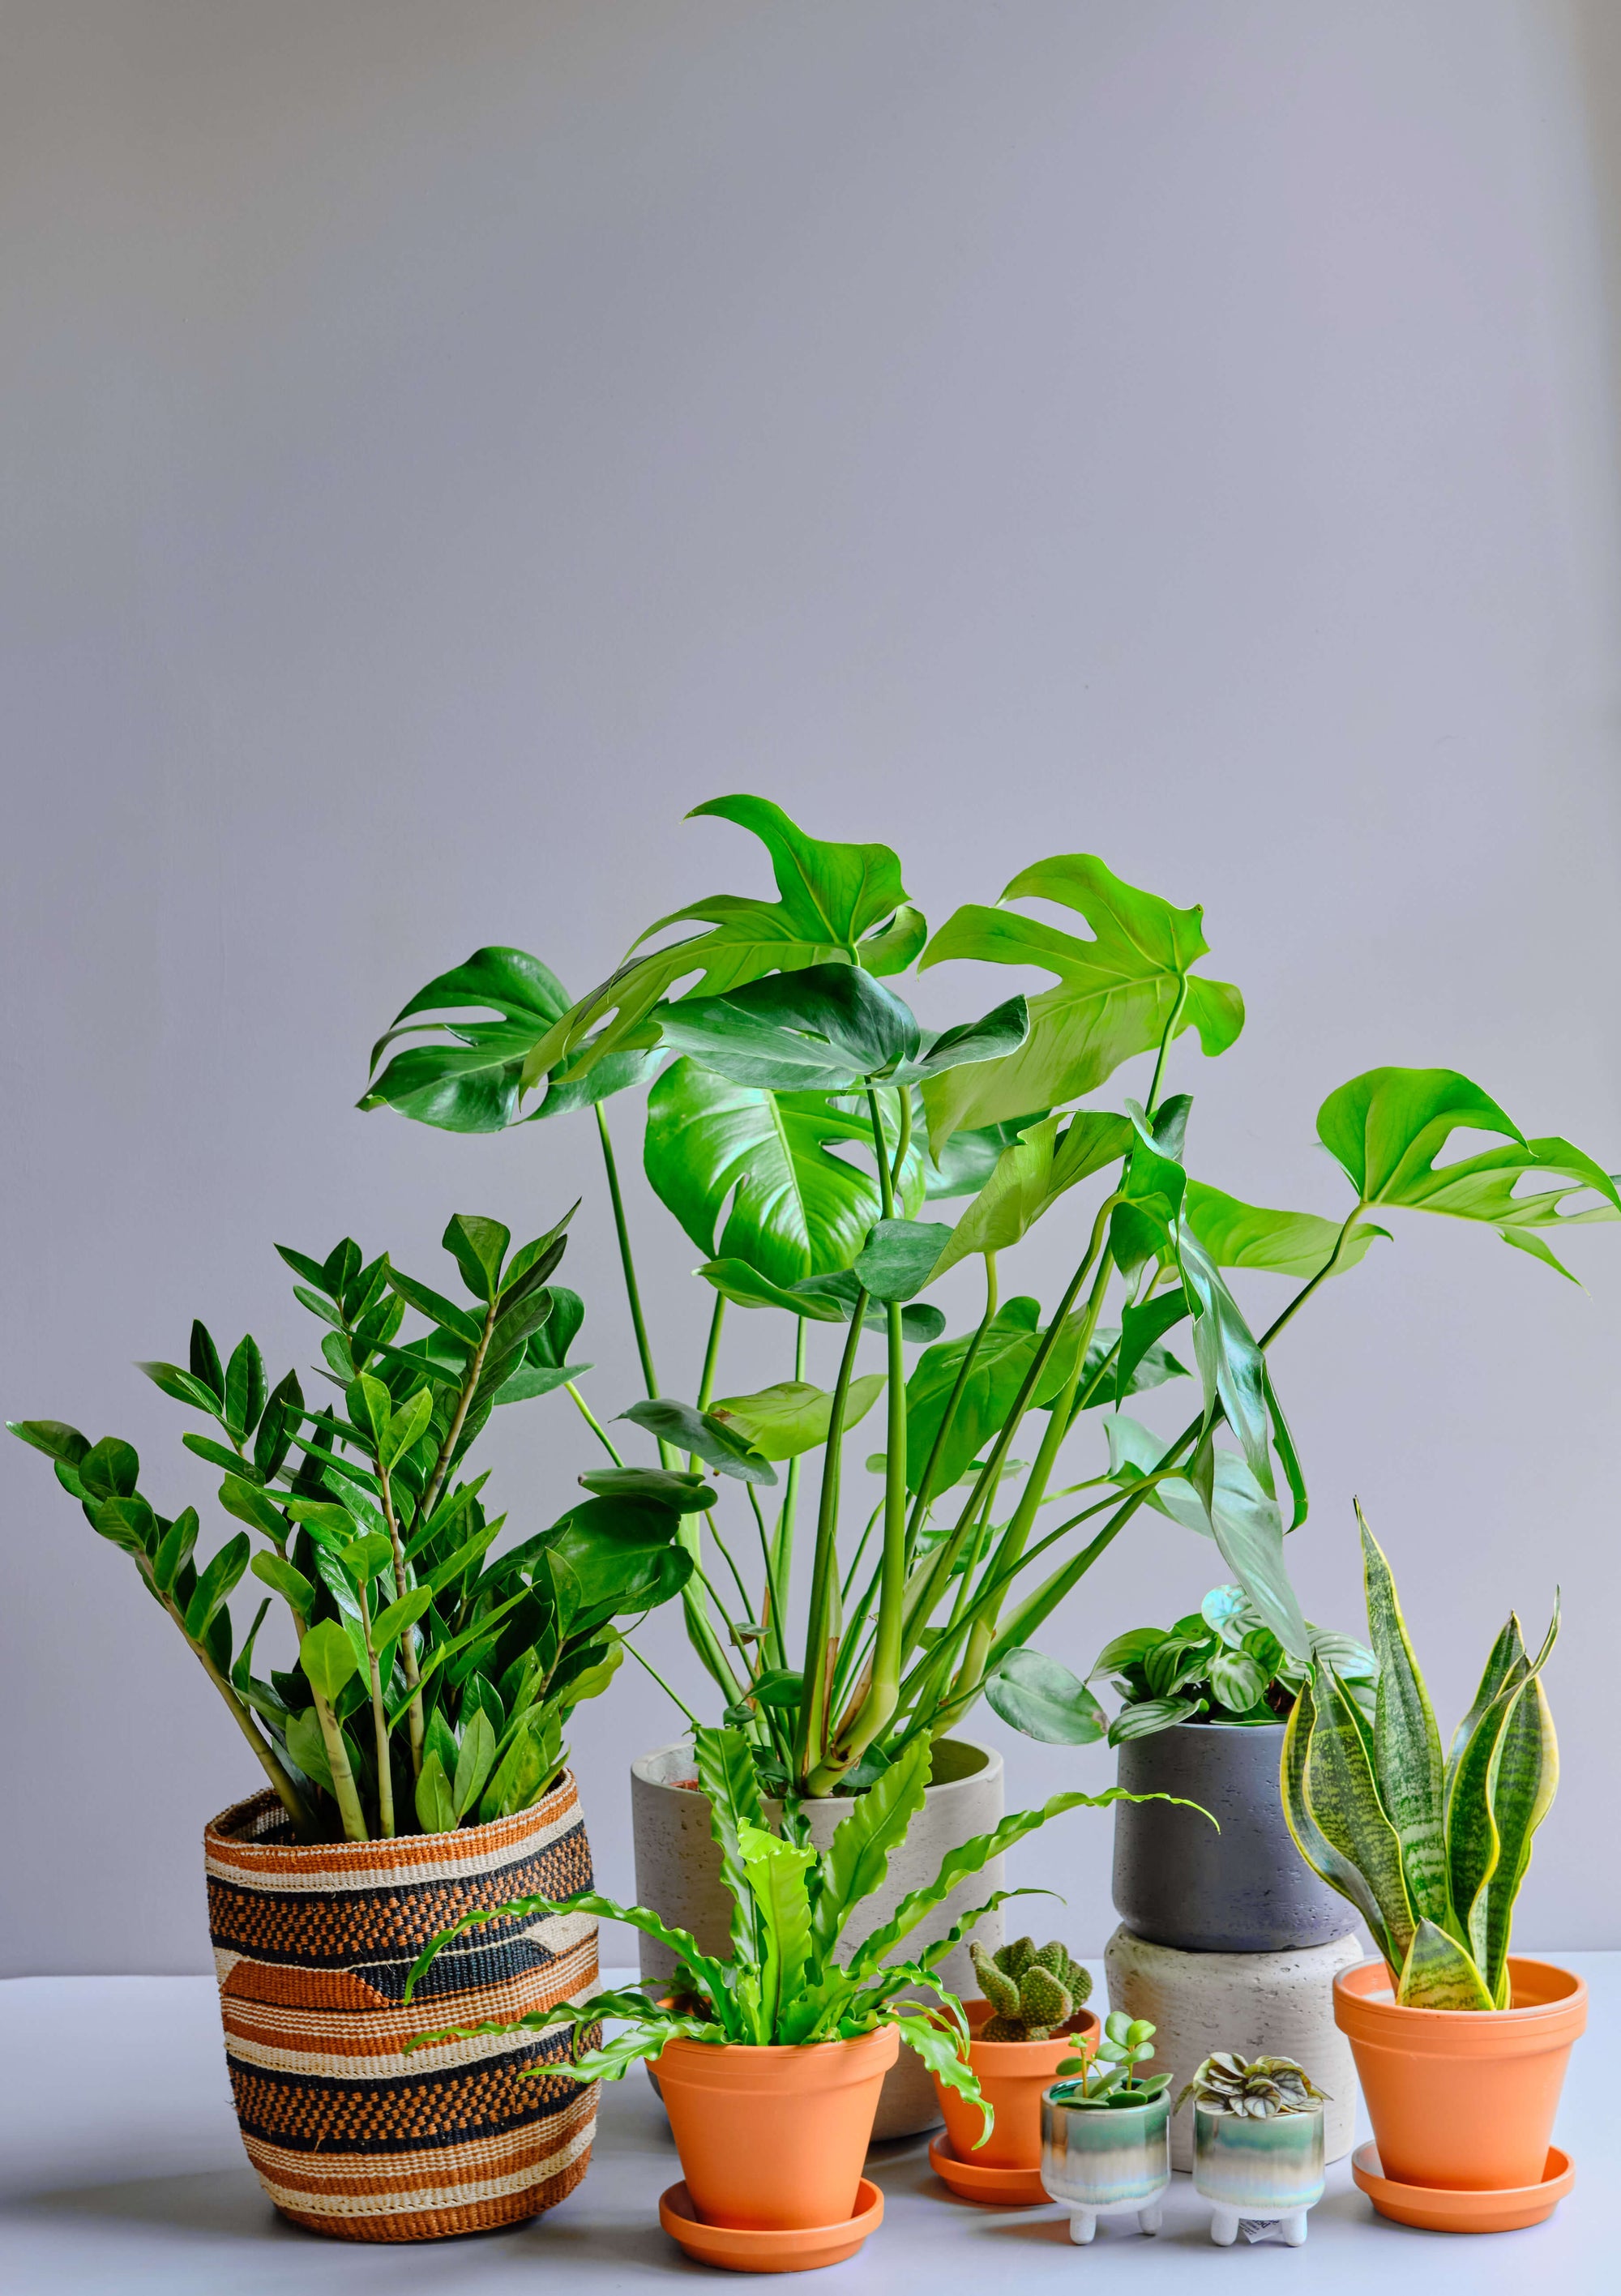 Monstera in decorative pot, Birds nest fern in terracotta pot, ZZ plant in decorative sisal basket, Snake plant in terracotta pot, Cactus in terracotta pot, Watermelon Peperomia in terracotta pot, two small peperomia variants in small green planters 